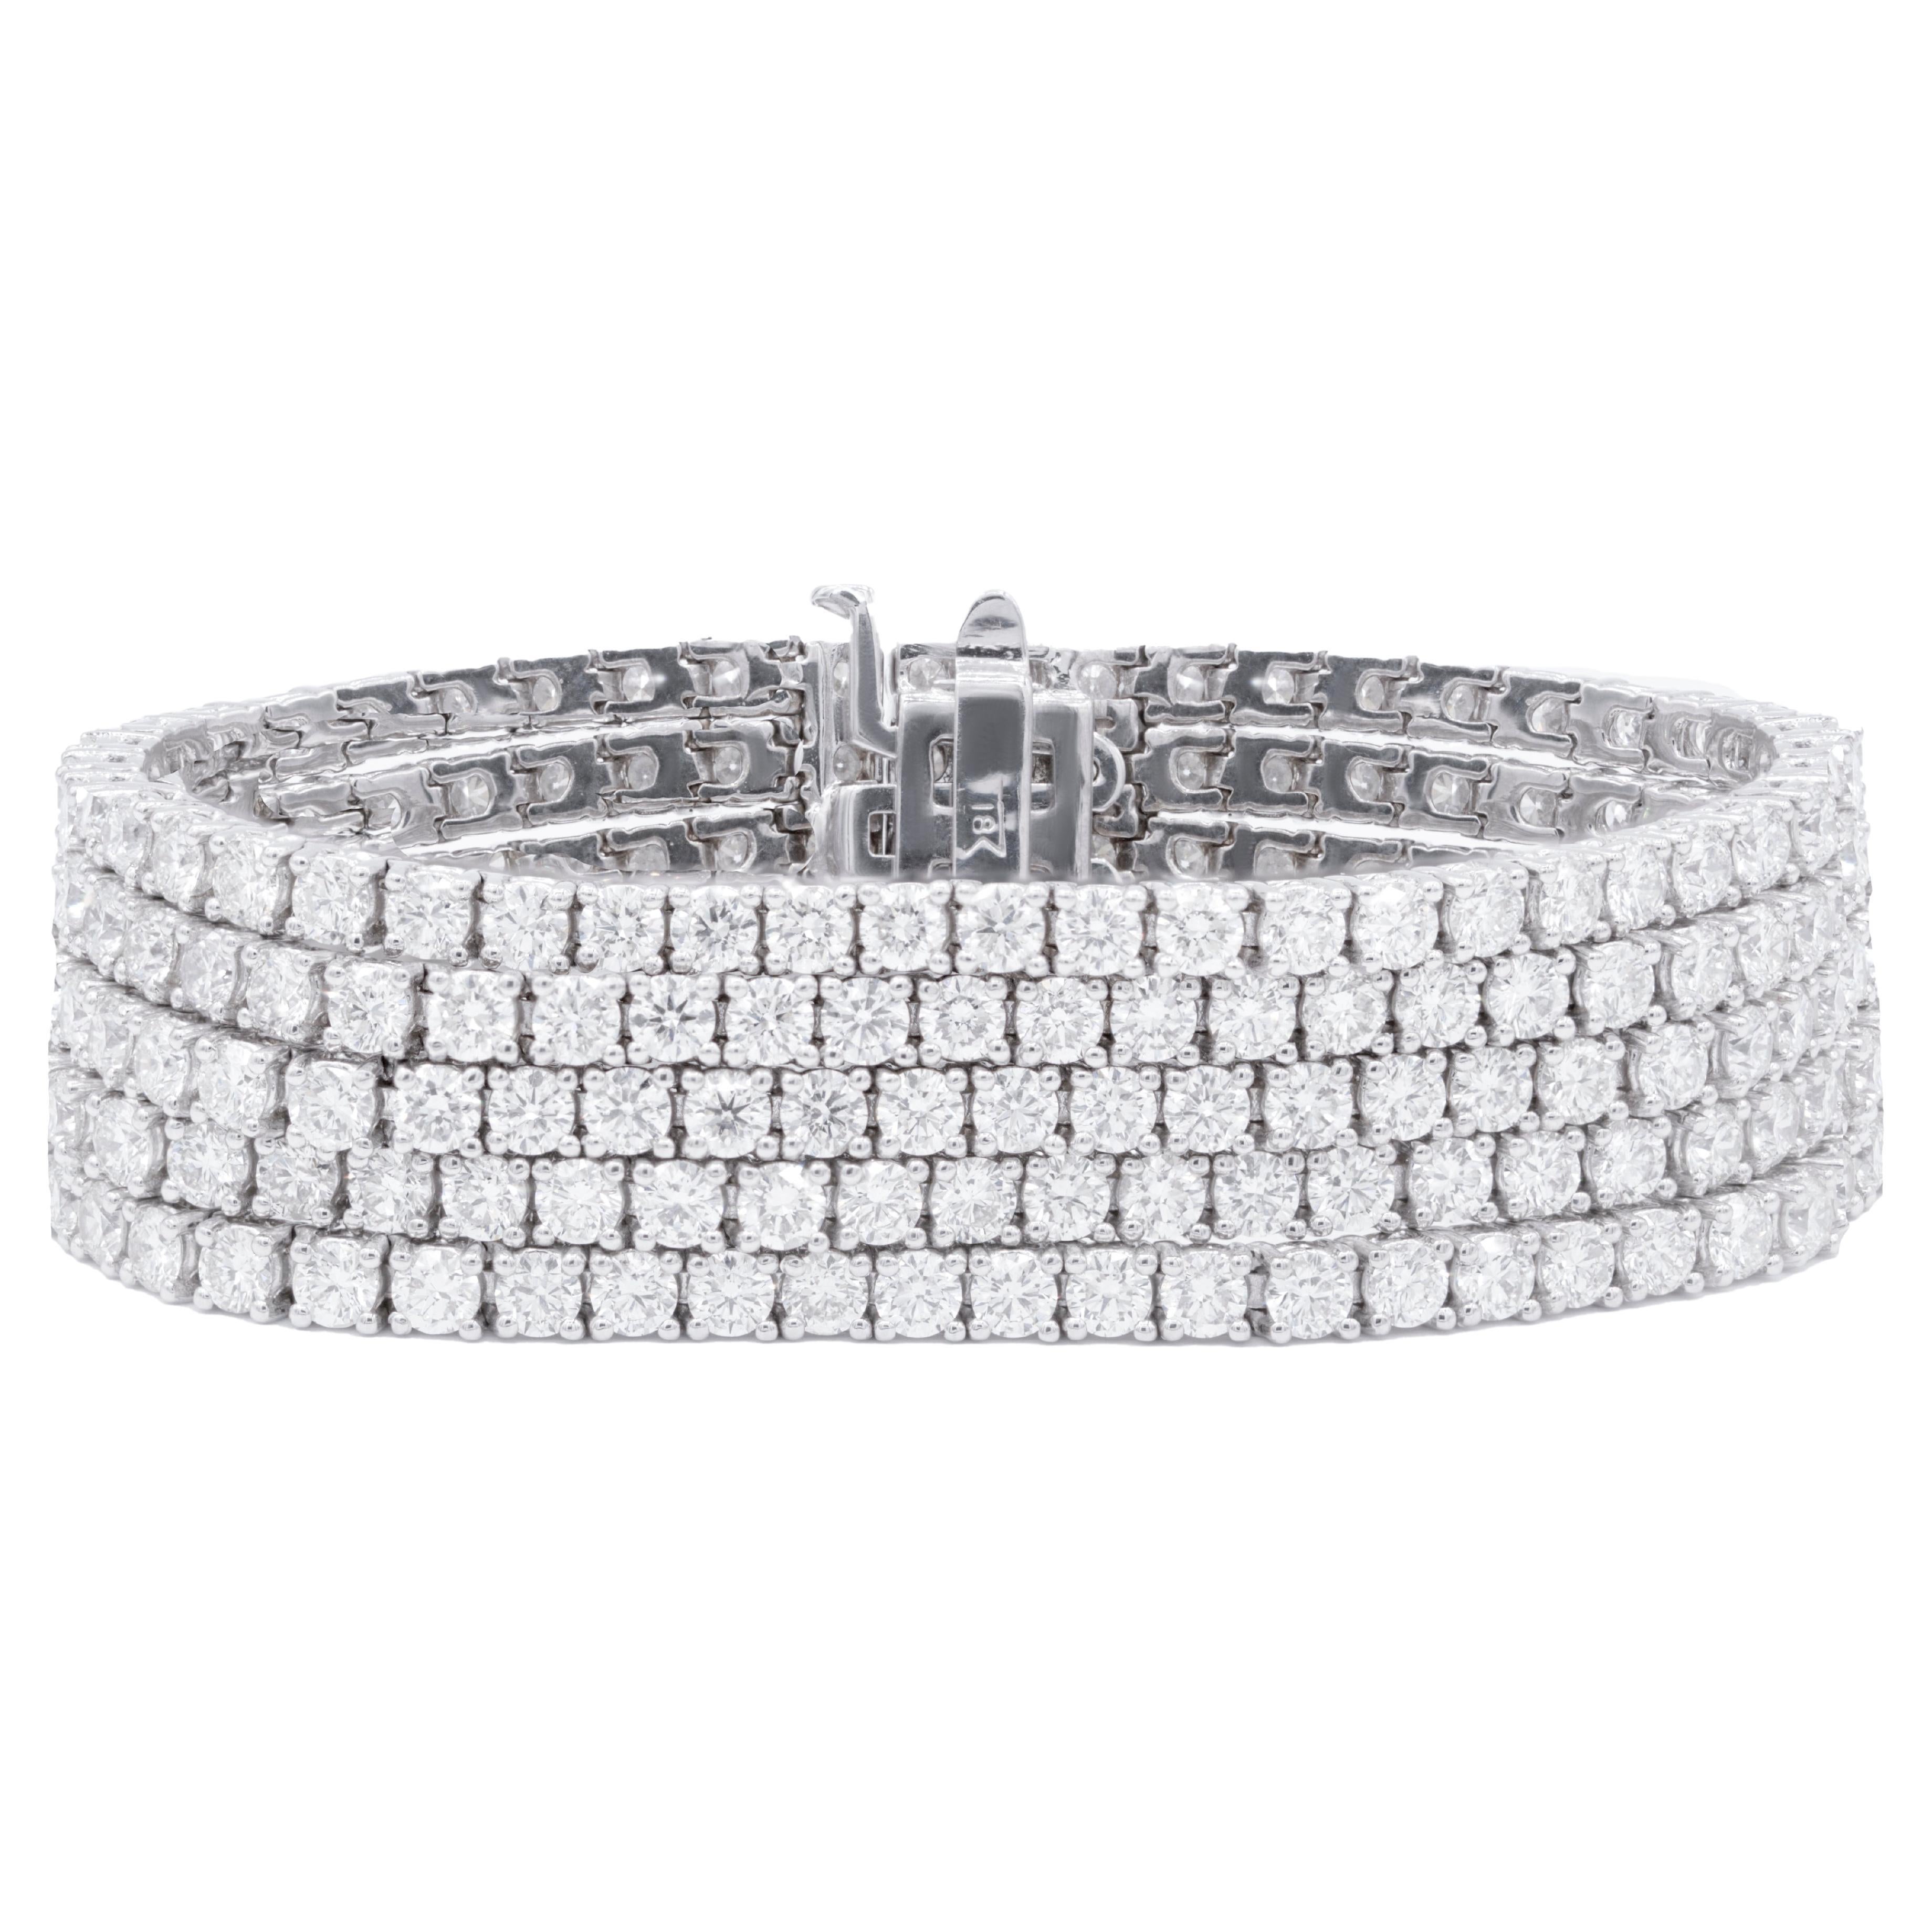 Diana M. 18kt white gold tennis bracelet featuring 5 rows of 36.00 cts round dia For Sale